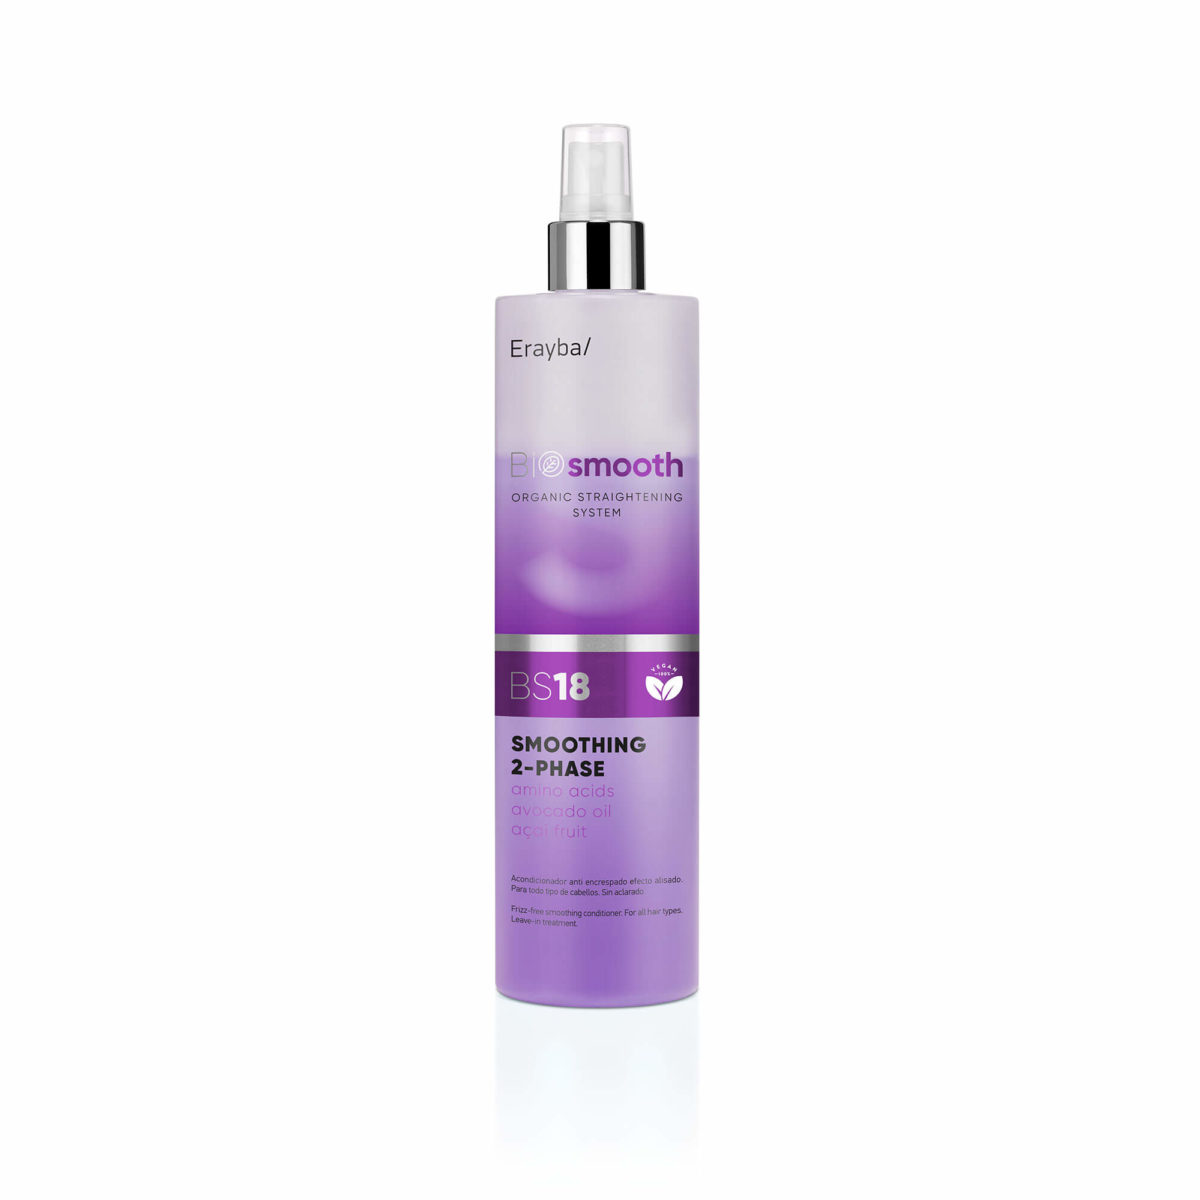 BIOsmooth BS18 smoothing 2-phase 1l